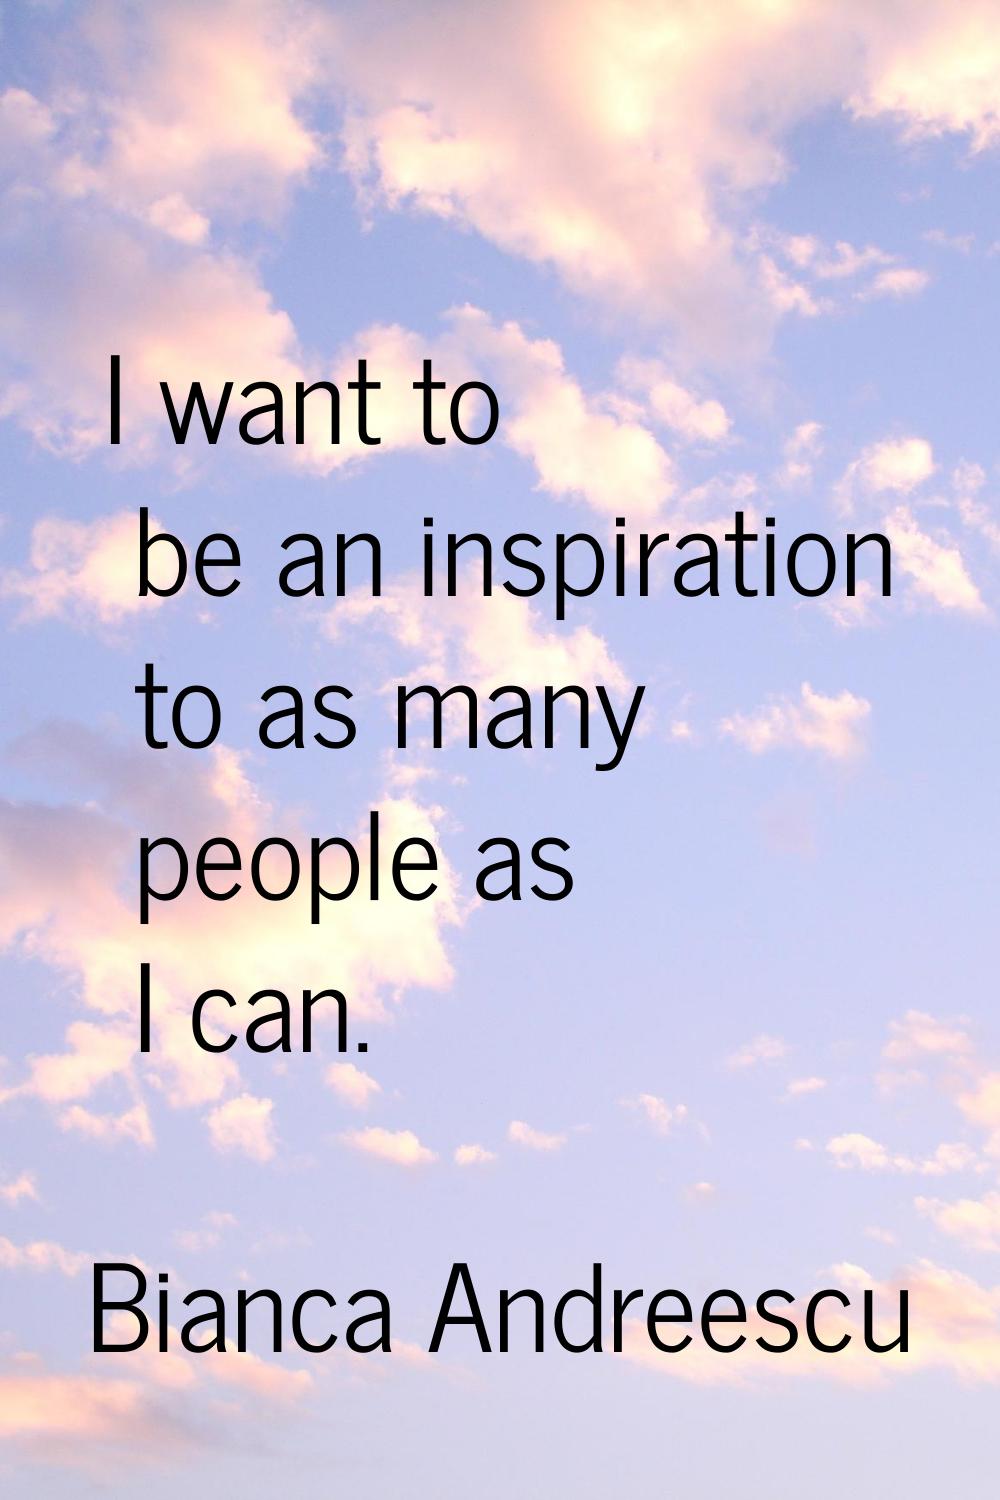 I want to be an inspiration to as many people as I can.